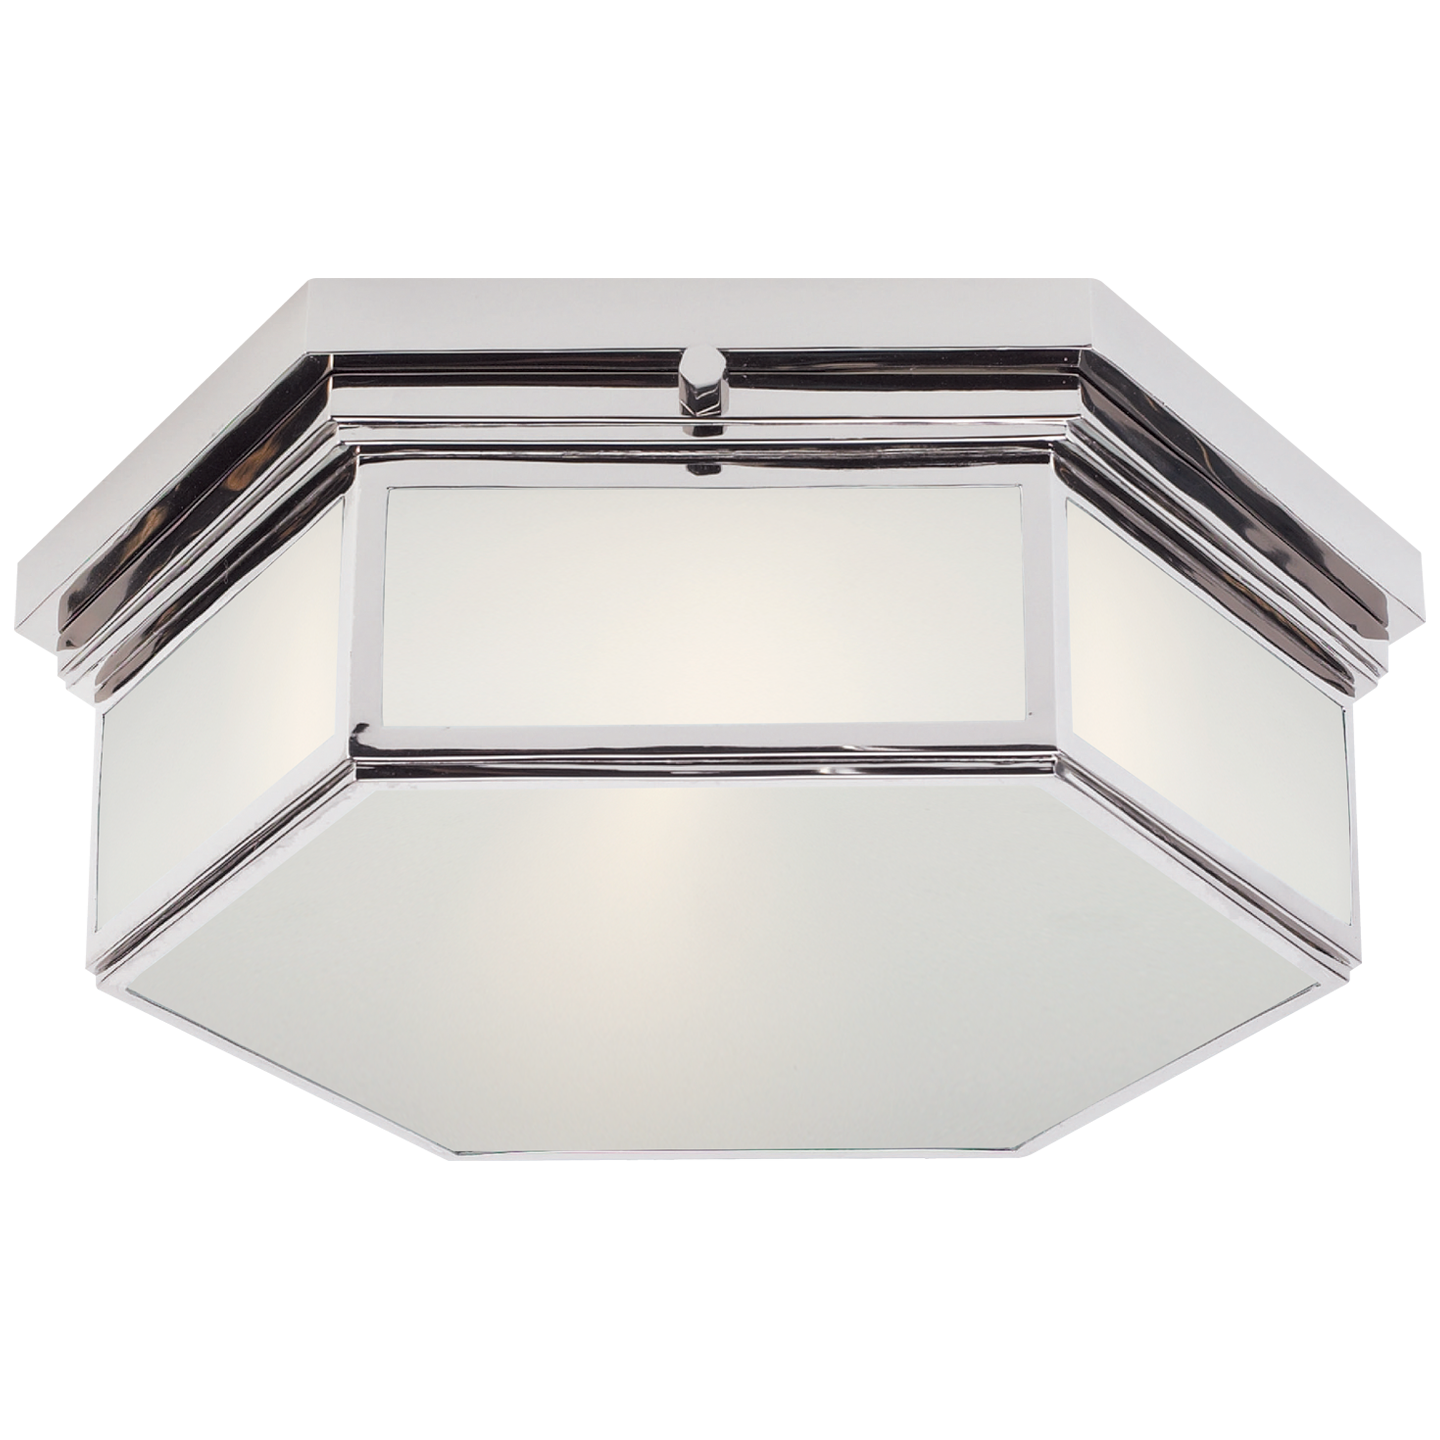 Berling Small Ceiling Light 